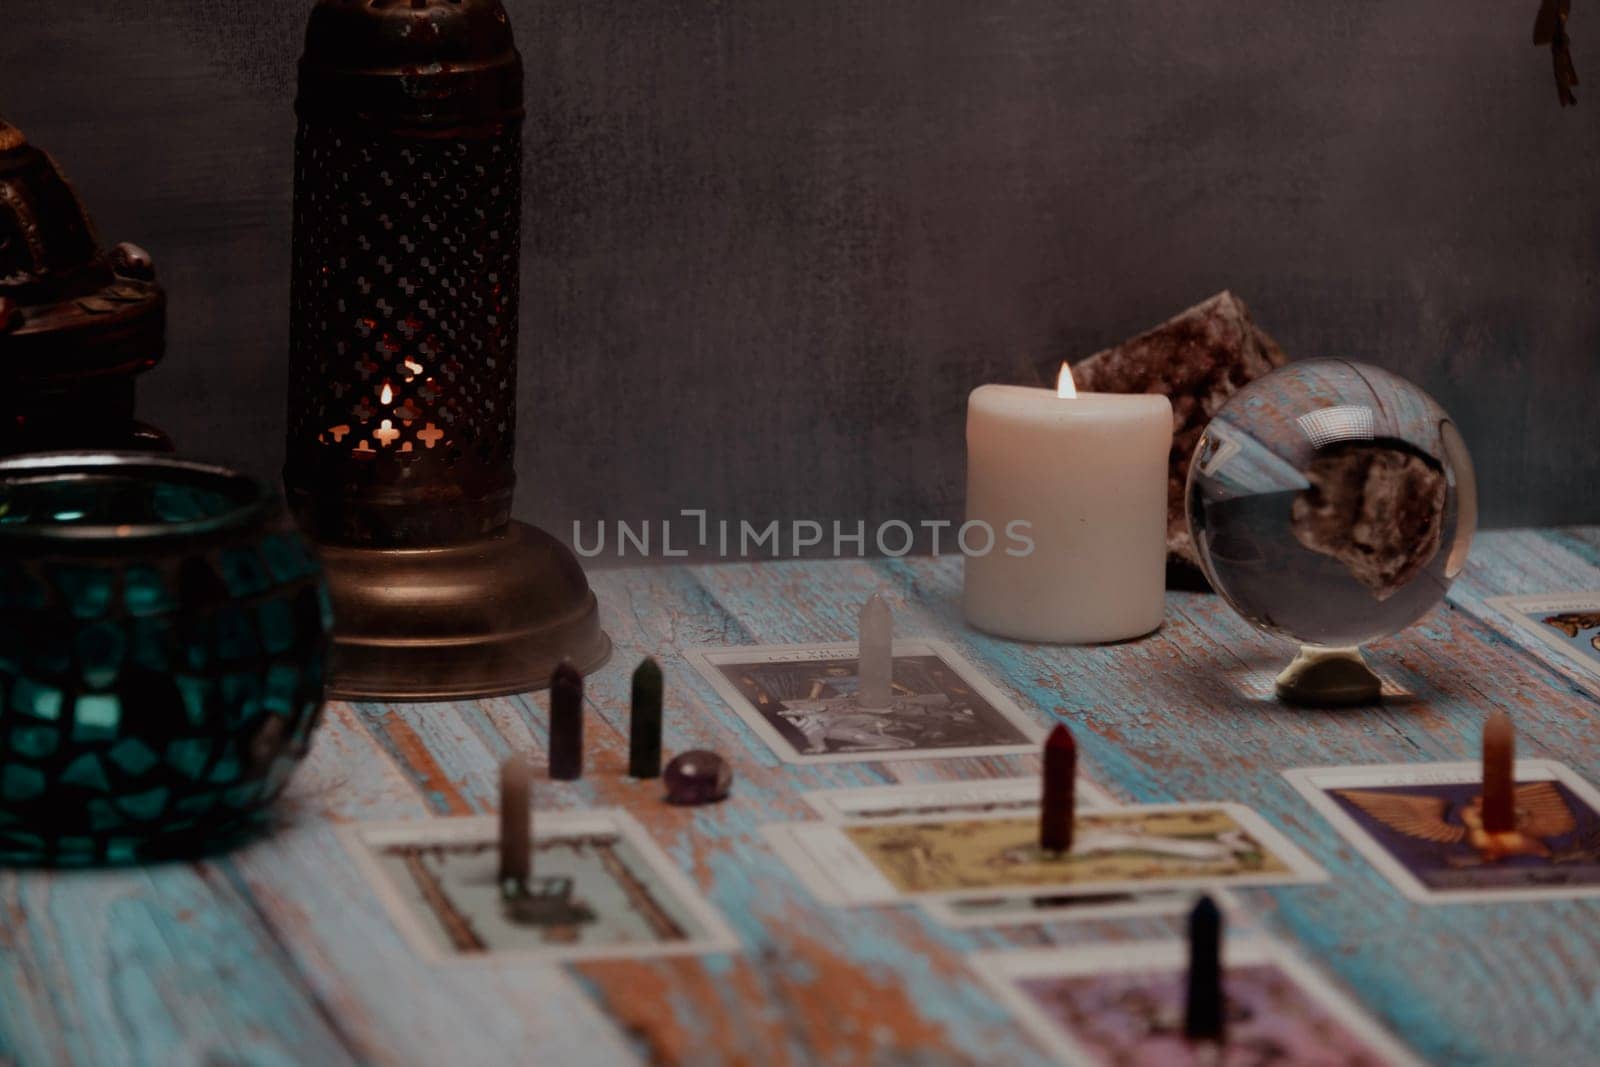 A dimly lit scene showing a spread of tarot cards, alongside crystals, candles, and a crystal ball on a rustic wooden table. by jbruiz78